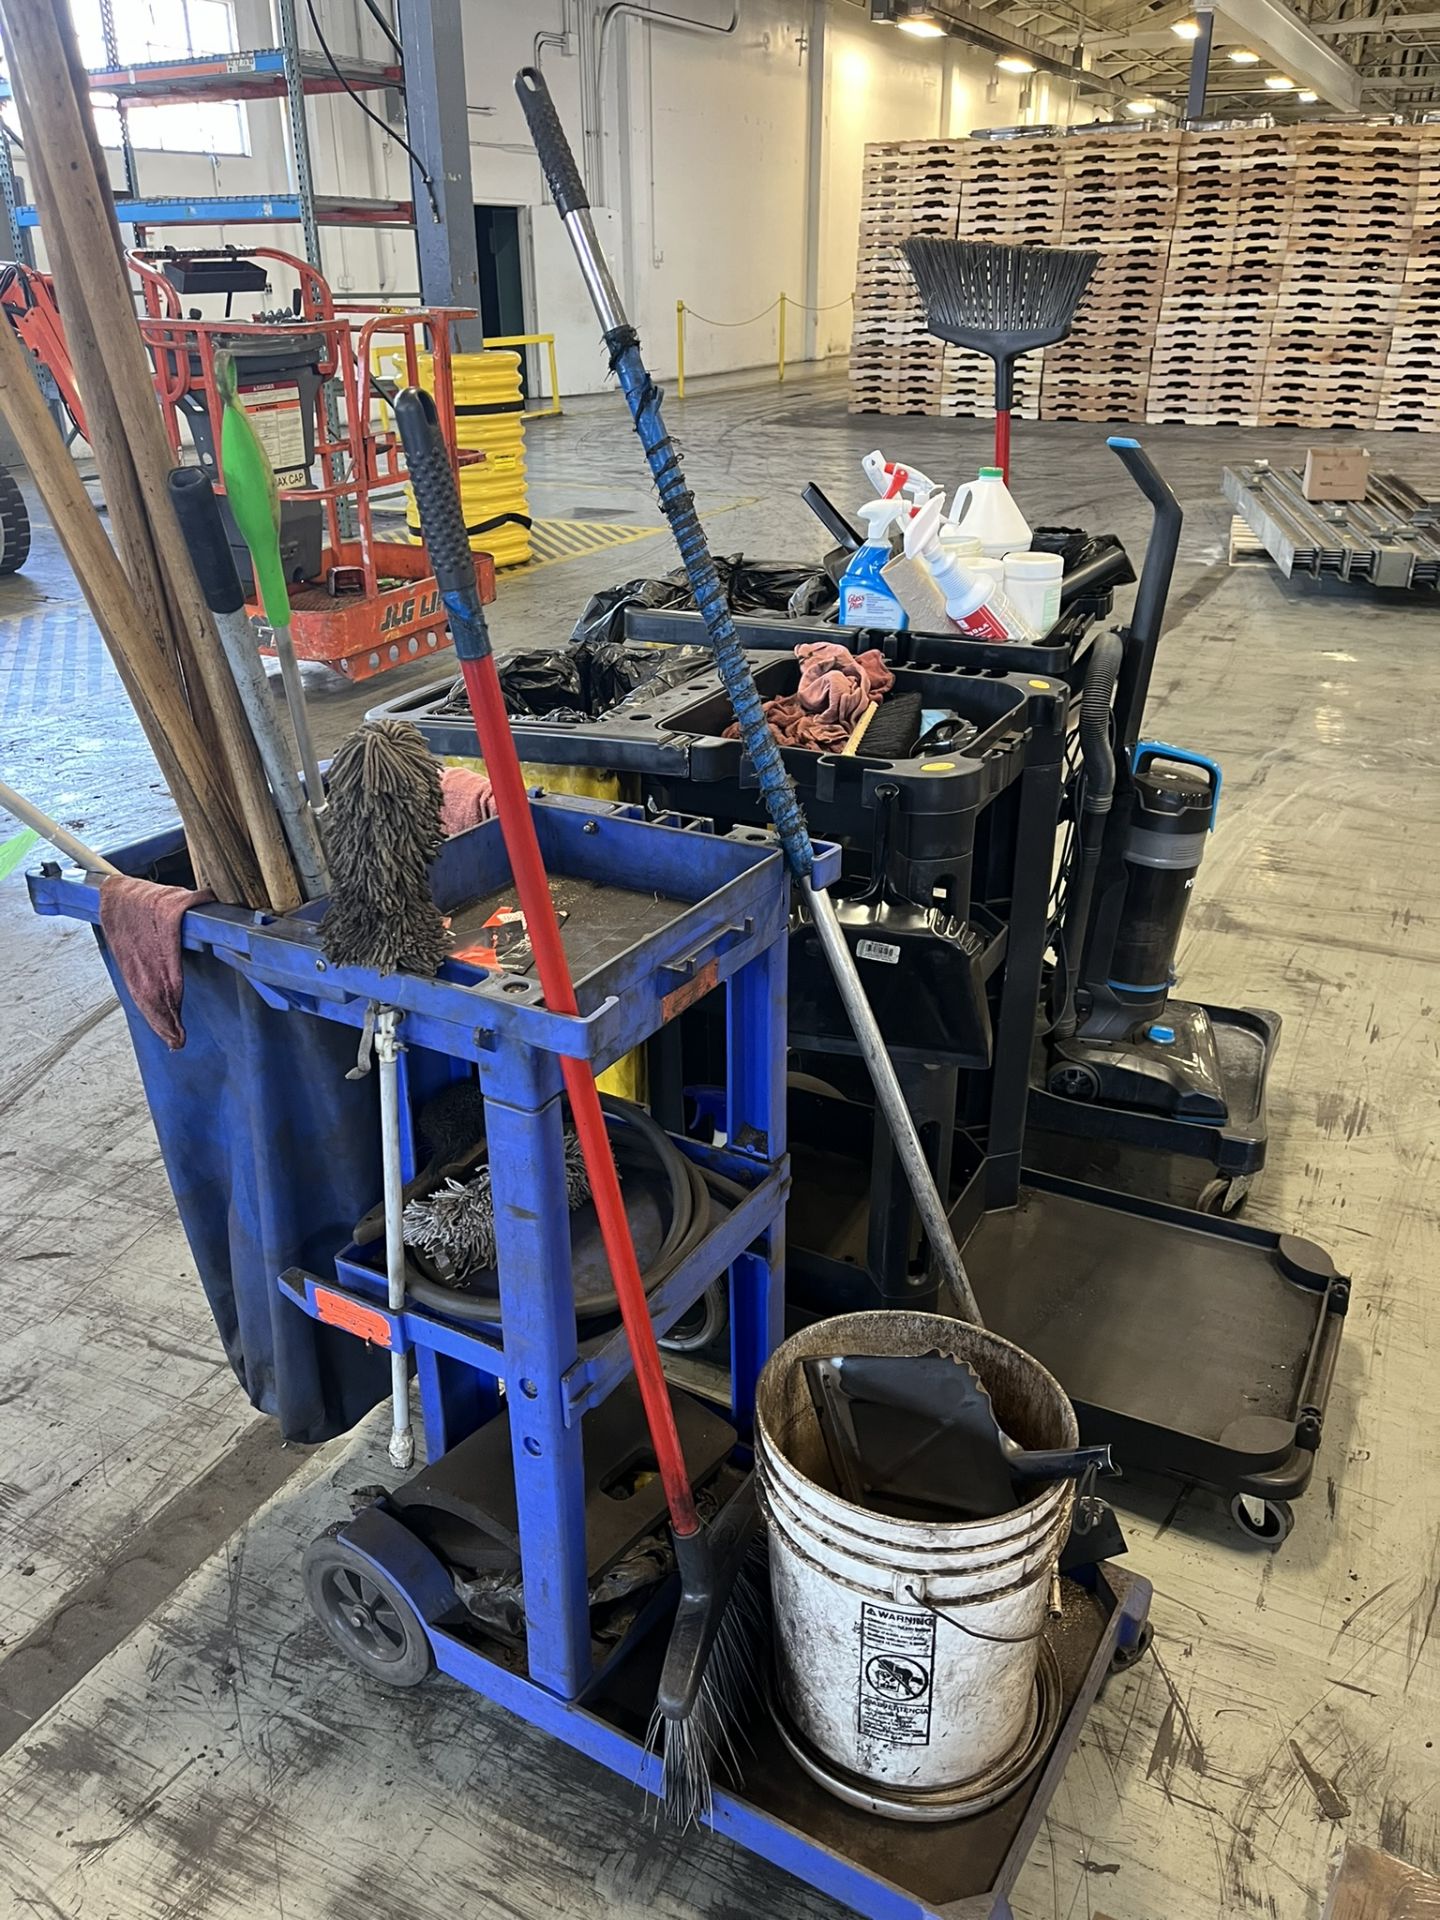 (3) CLEANING CARTS